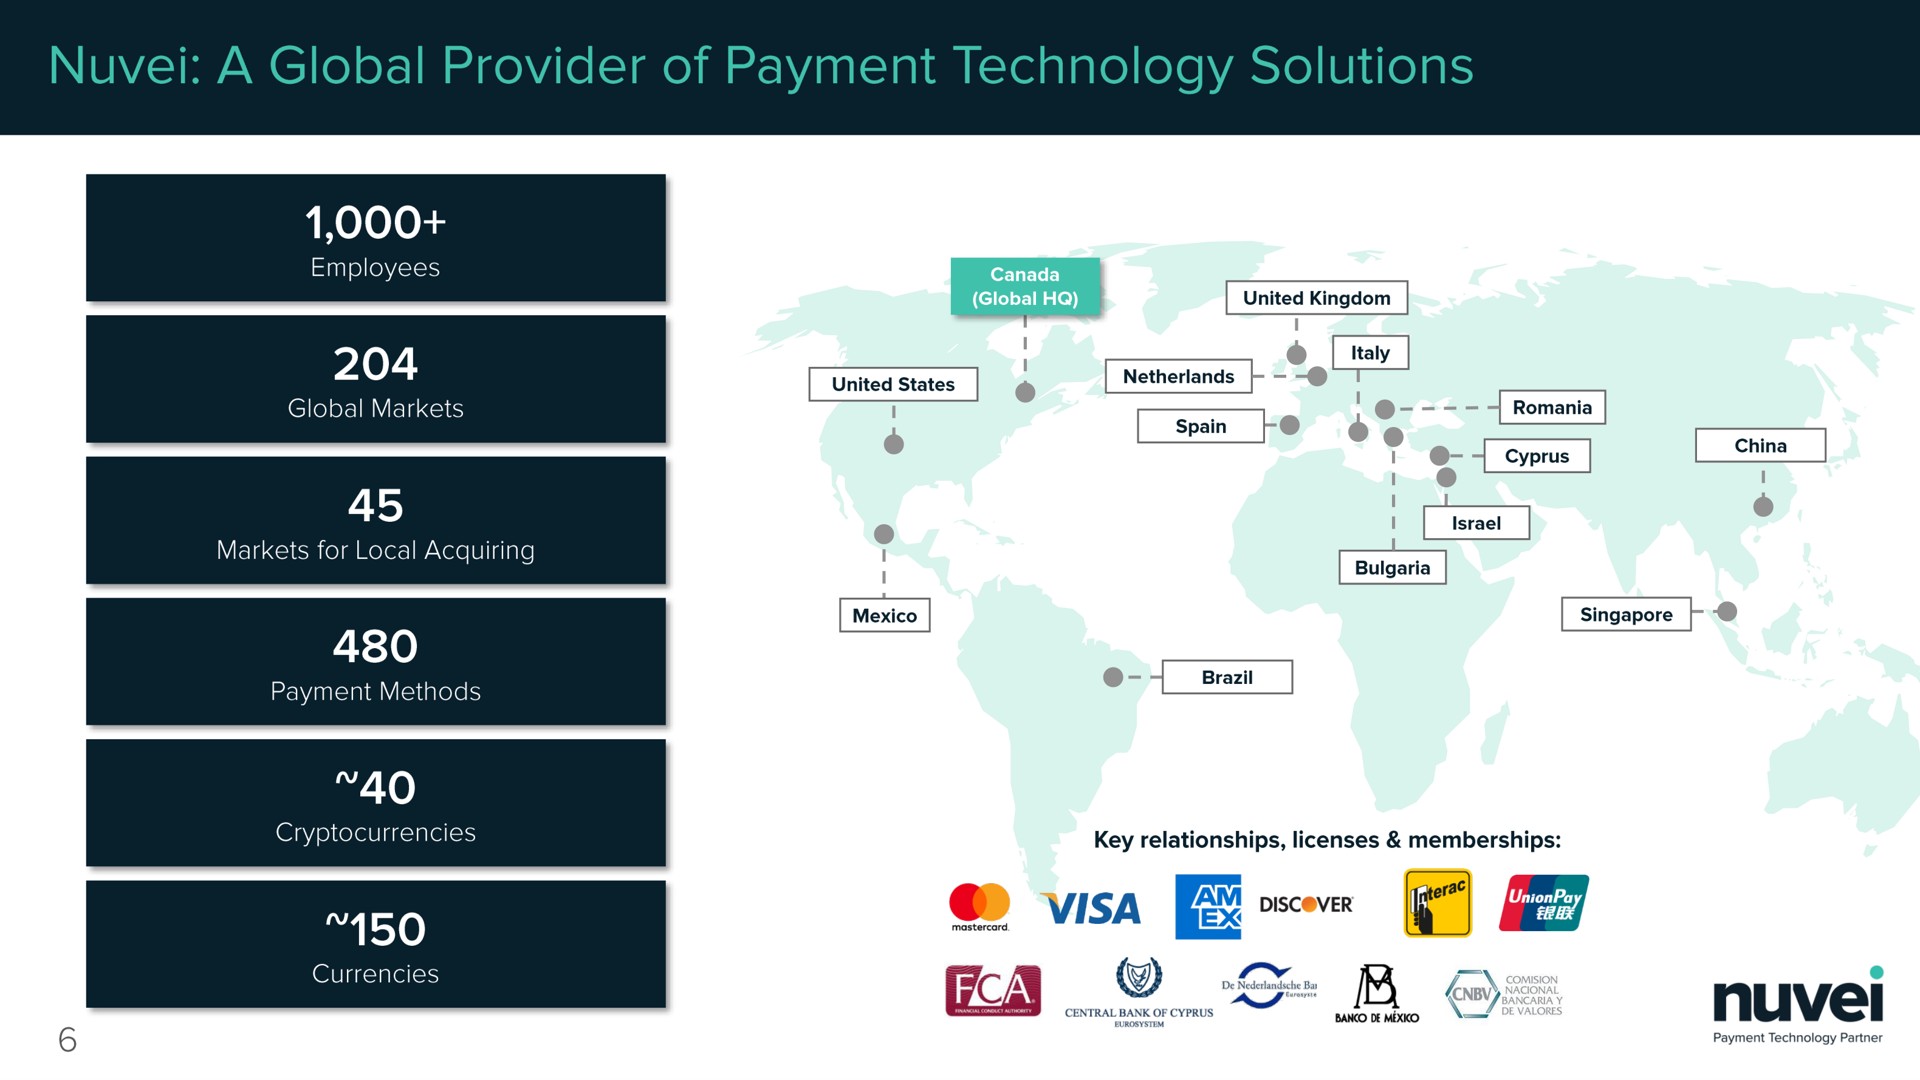 a global provider of payment technology solutions me | Nuvei